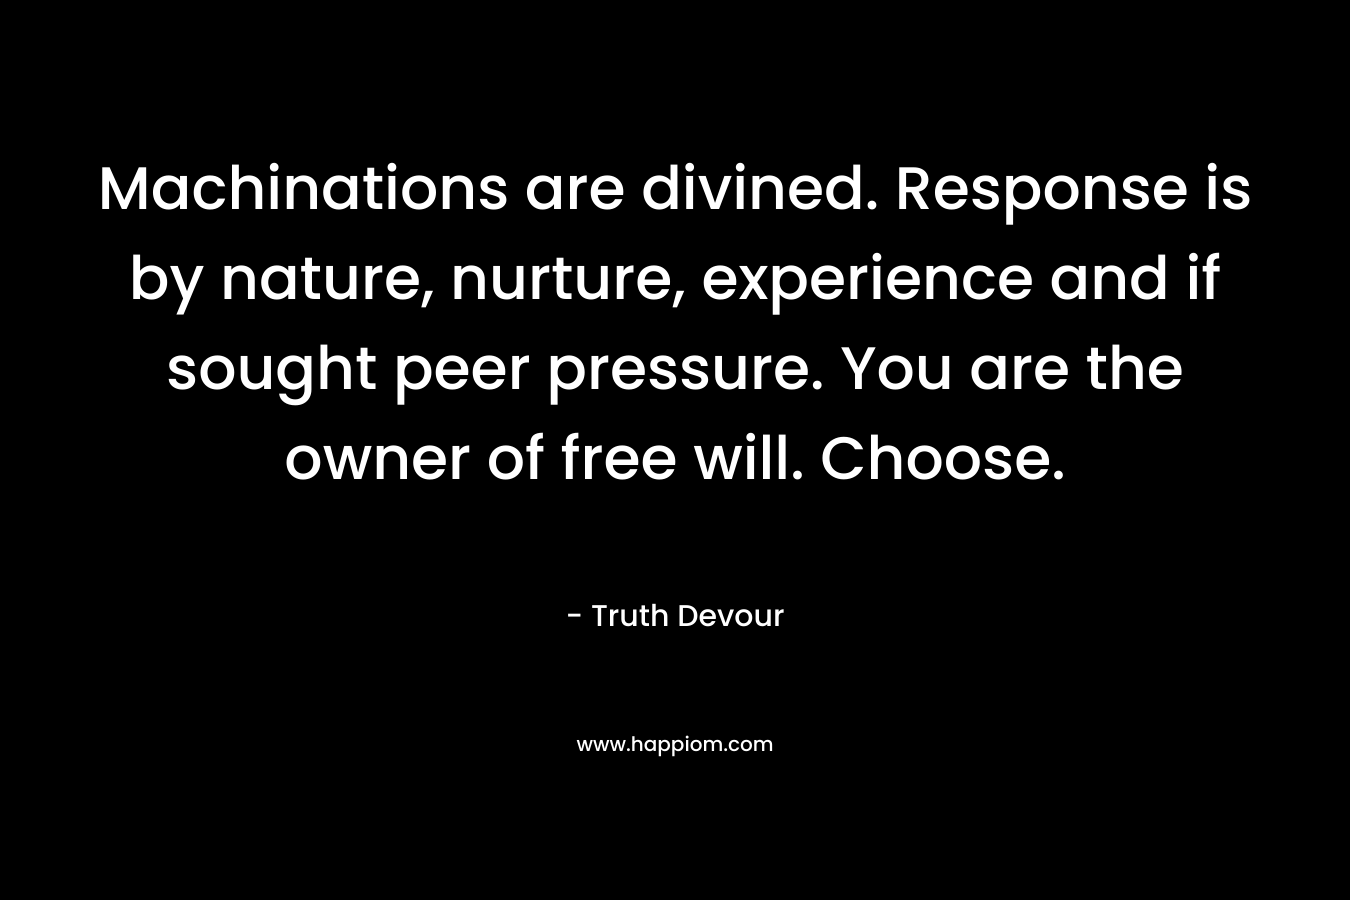 Machinations are divined. Response is by nature, nurture, experience and if sought peer pressure. You are the owner of free will. Choose.